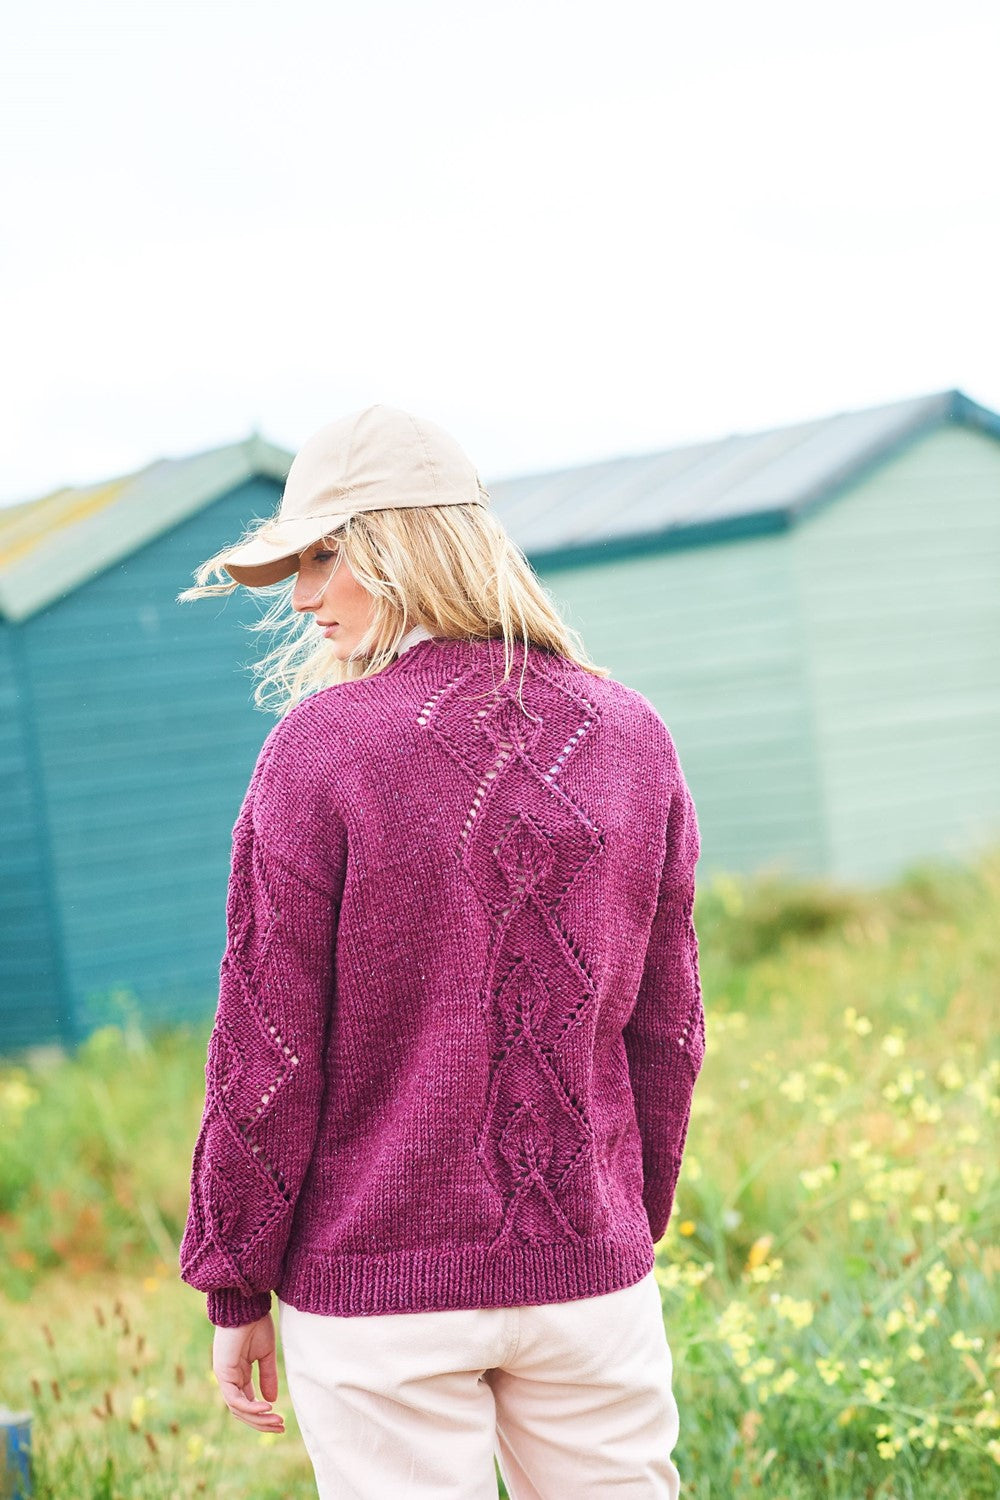 Knitting Pattern 9946 - Cardigans in Recreate Chunky